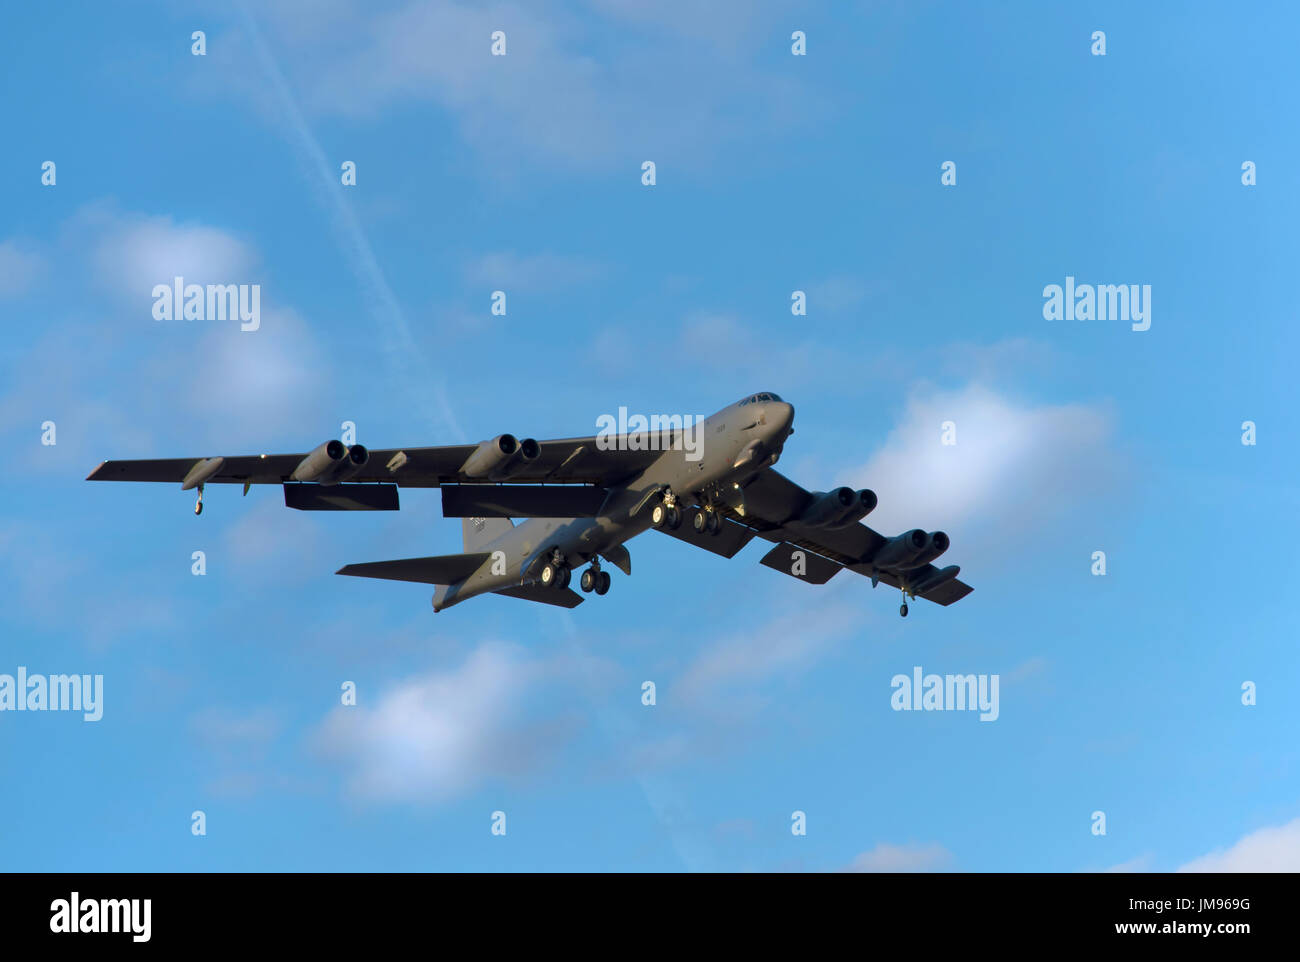 BOSSIER CITY, LOUISIANA, U.S.A.-APRIL 6, 2017: A U.S. Air Force B 52 bomber, assigned to the Air Force Global Strike Command's Eighth Air Force, prepa Stock Photo